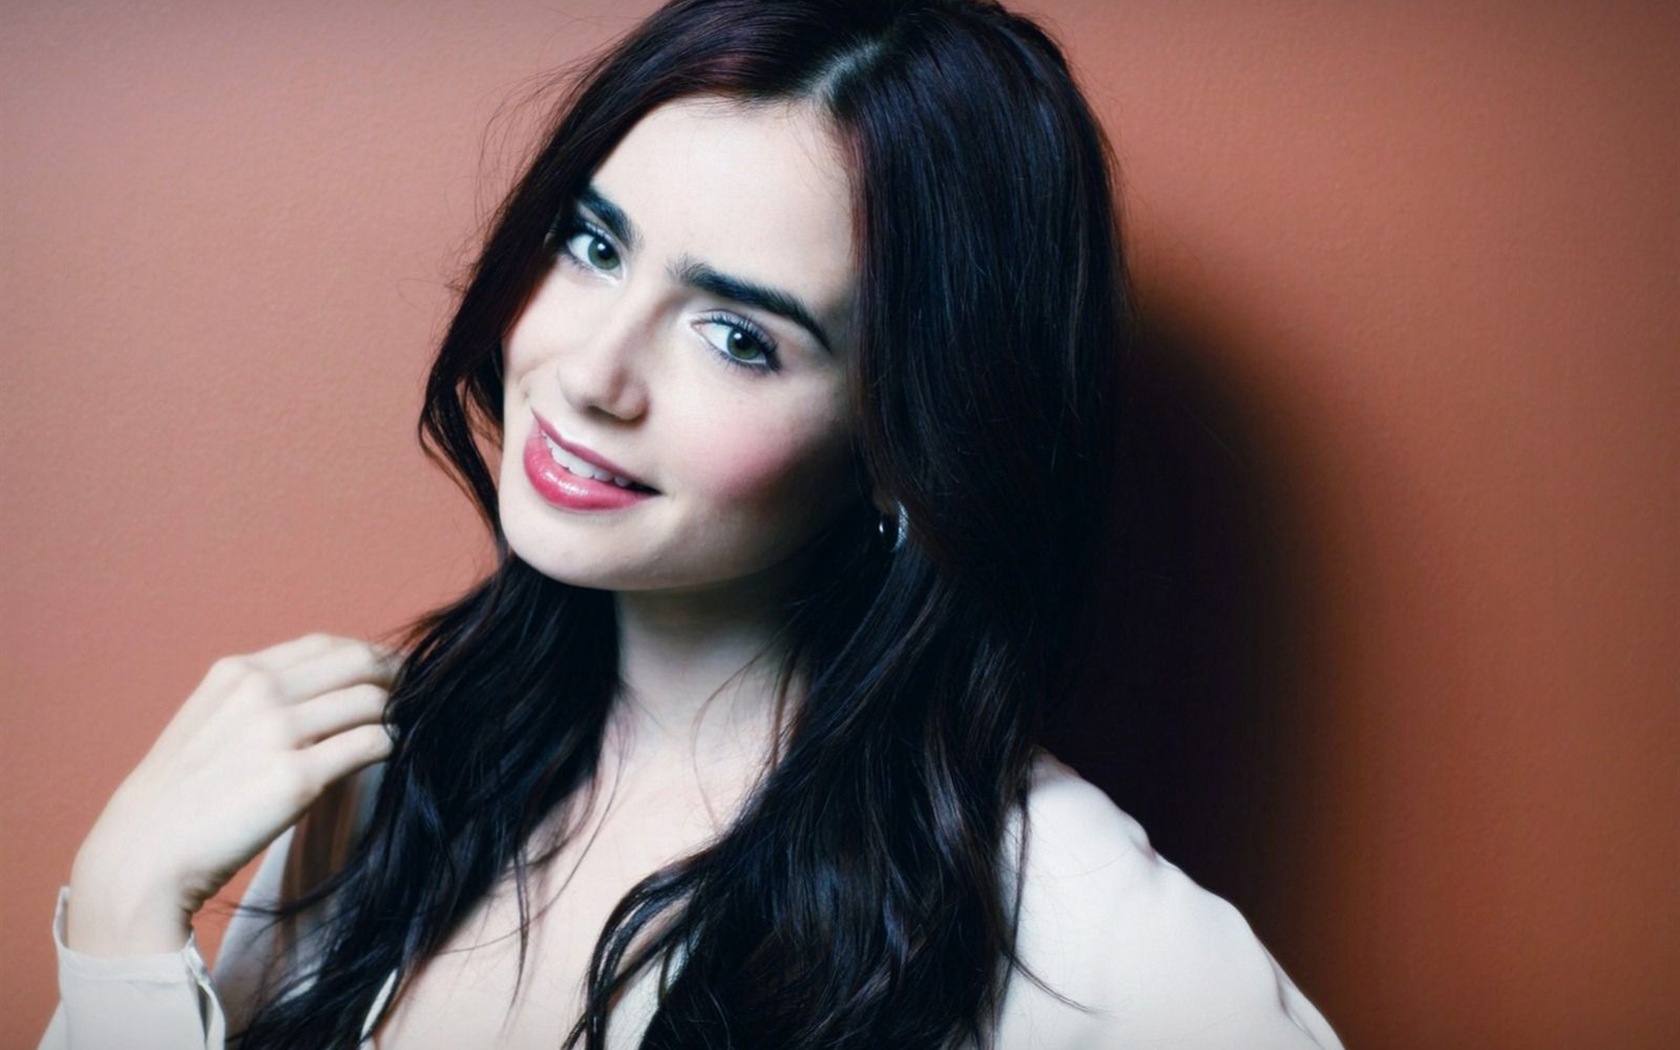 Lily Collins beautiful wallpapers #6 - 1680x1050